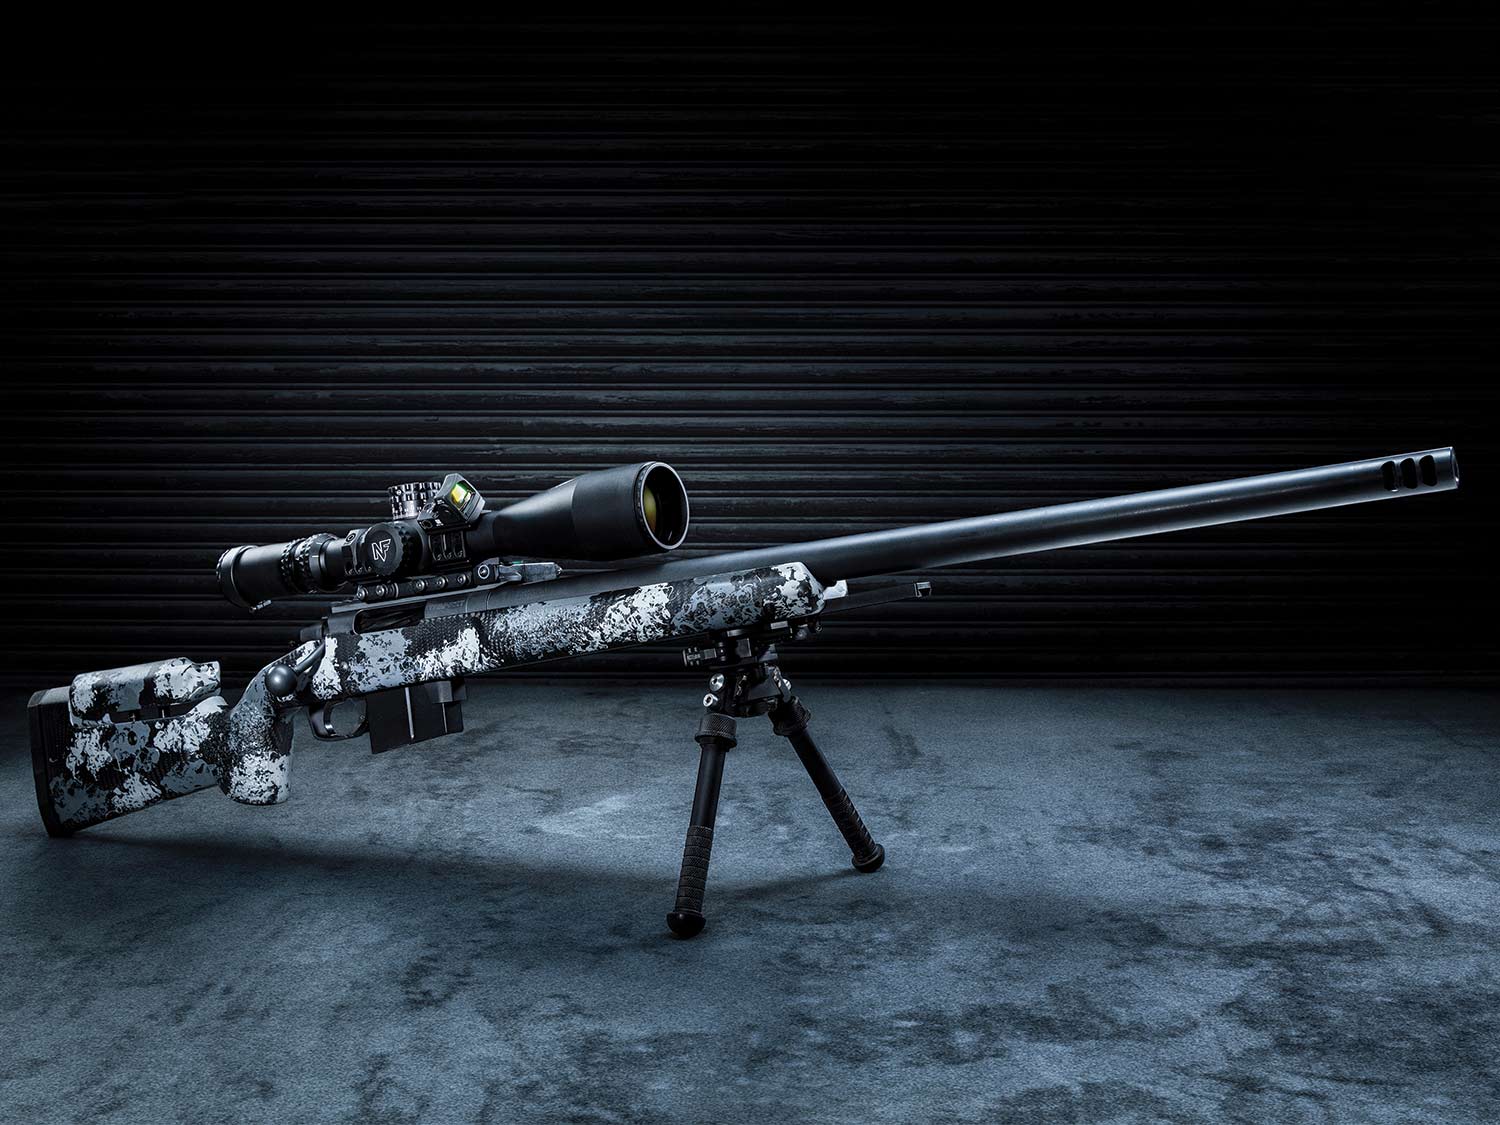 A black and grey camo-patterned rifle equipped with a riflescope and resting on shooting bipods.